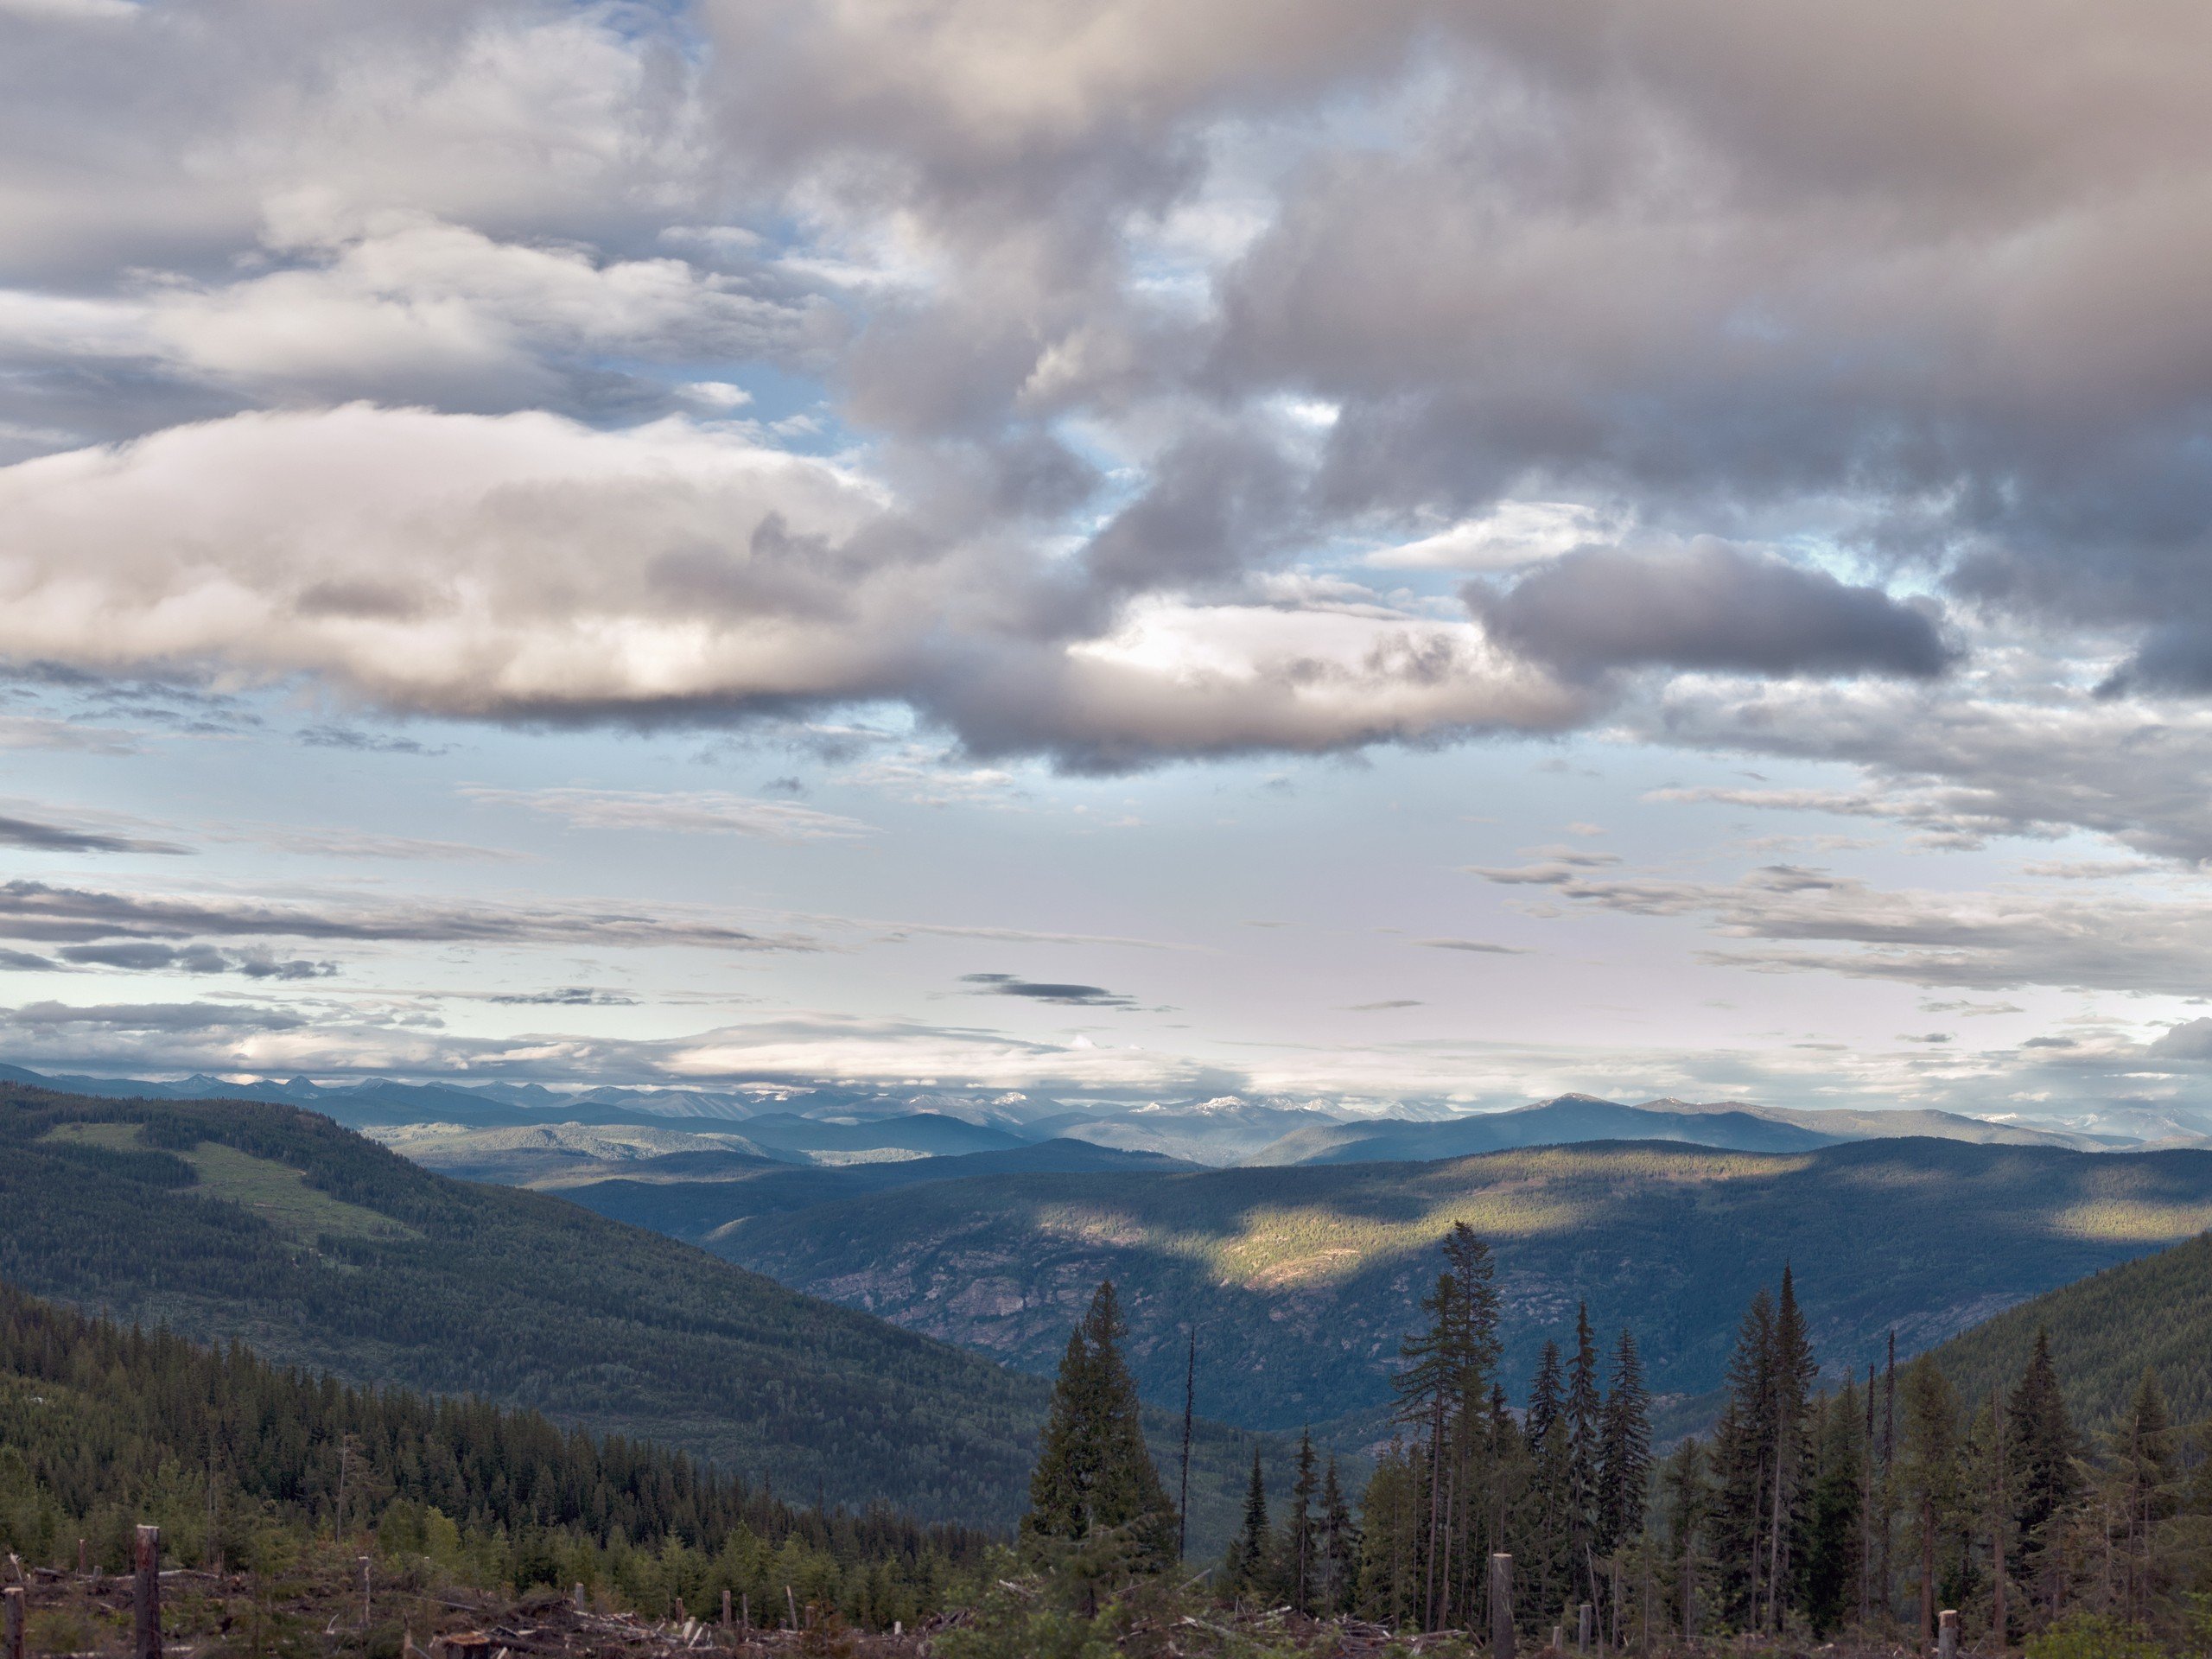 Looking over Kootenay forests